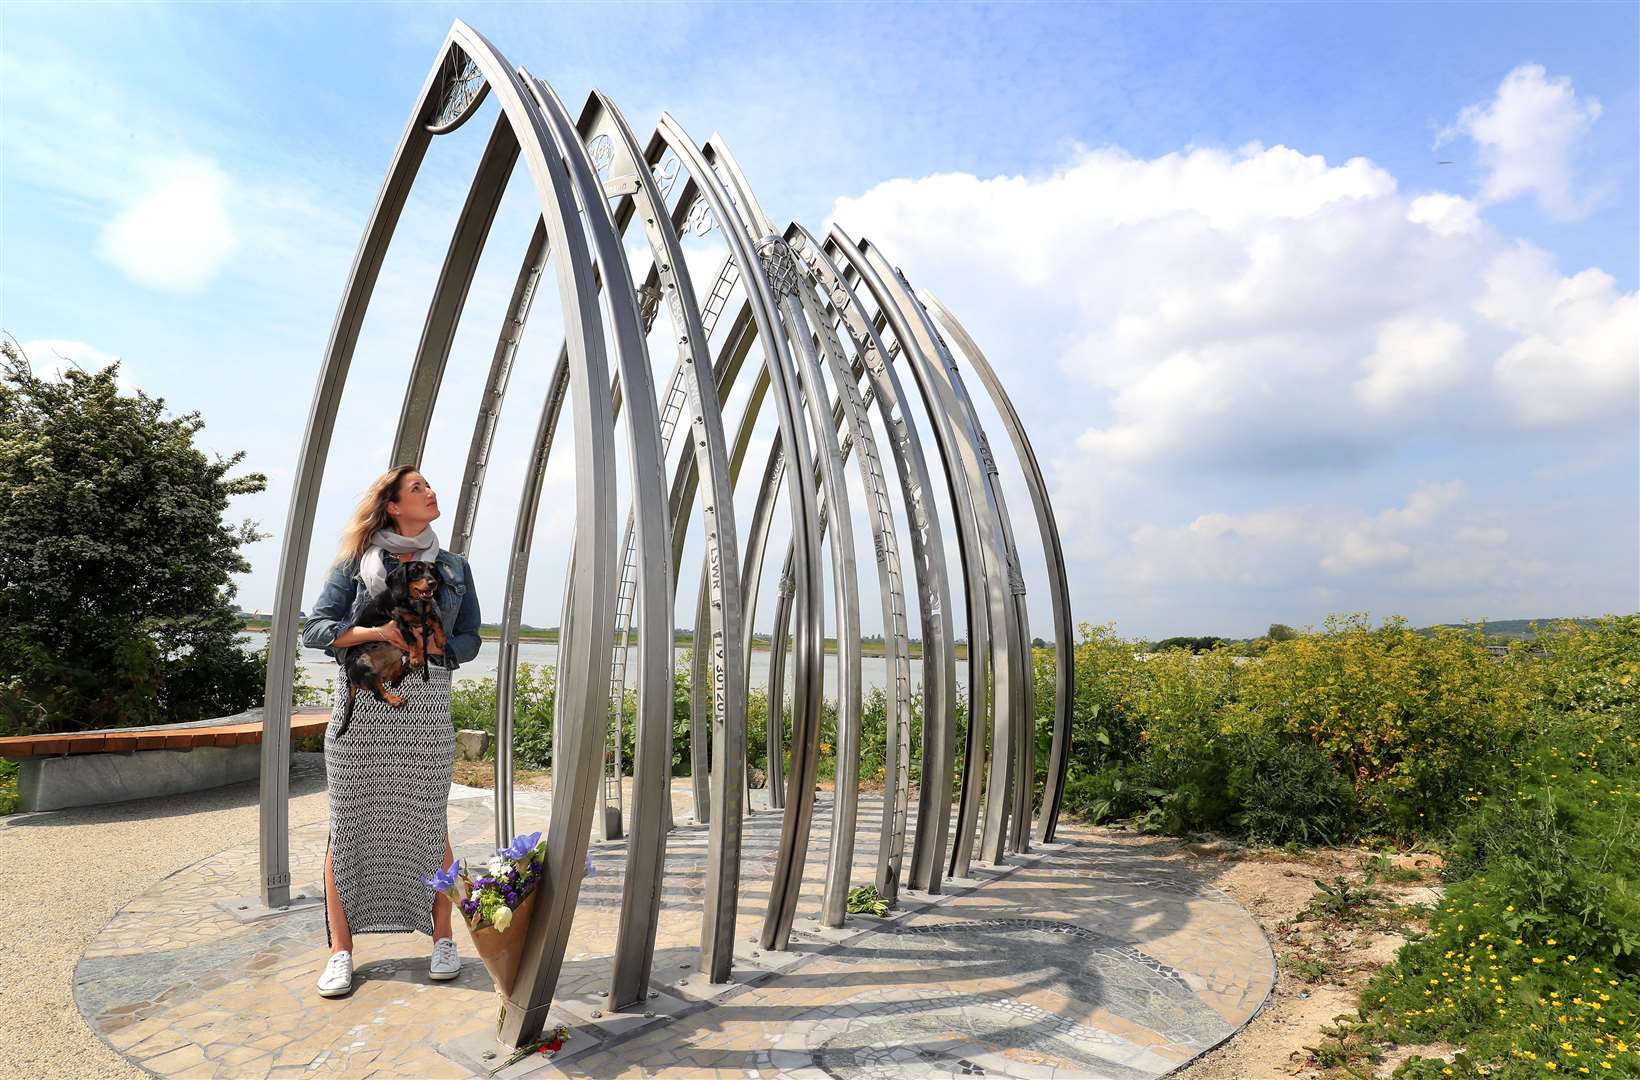 A memorial for the Shoreham Airshow victims has been installed on the banks of the Adur in Shoreham (PA)